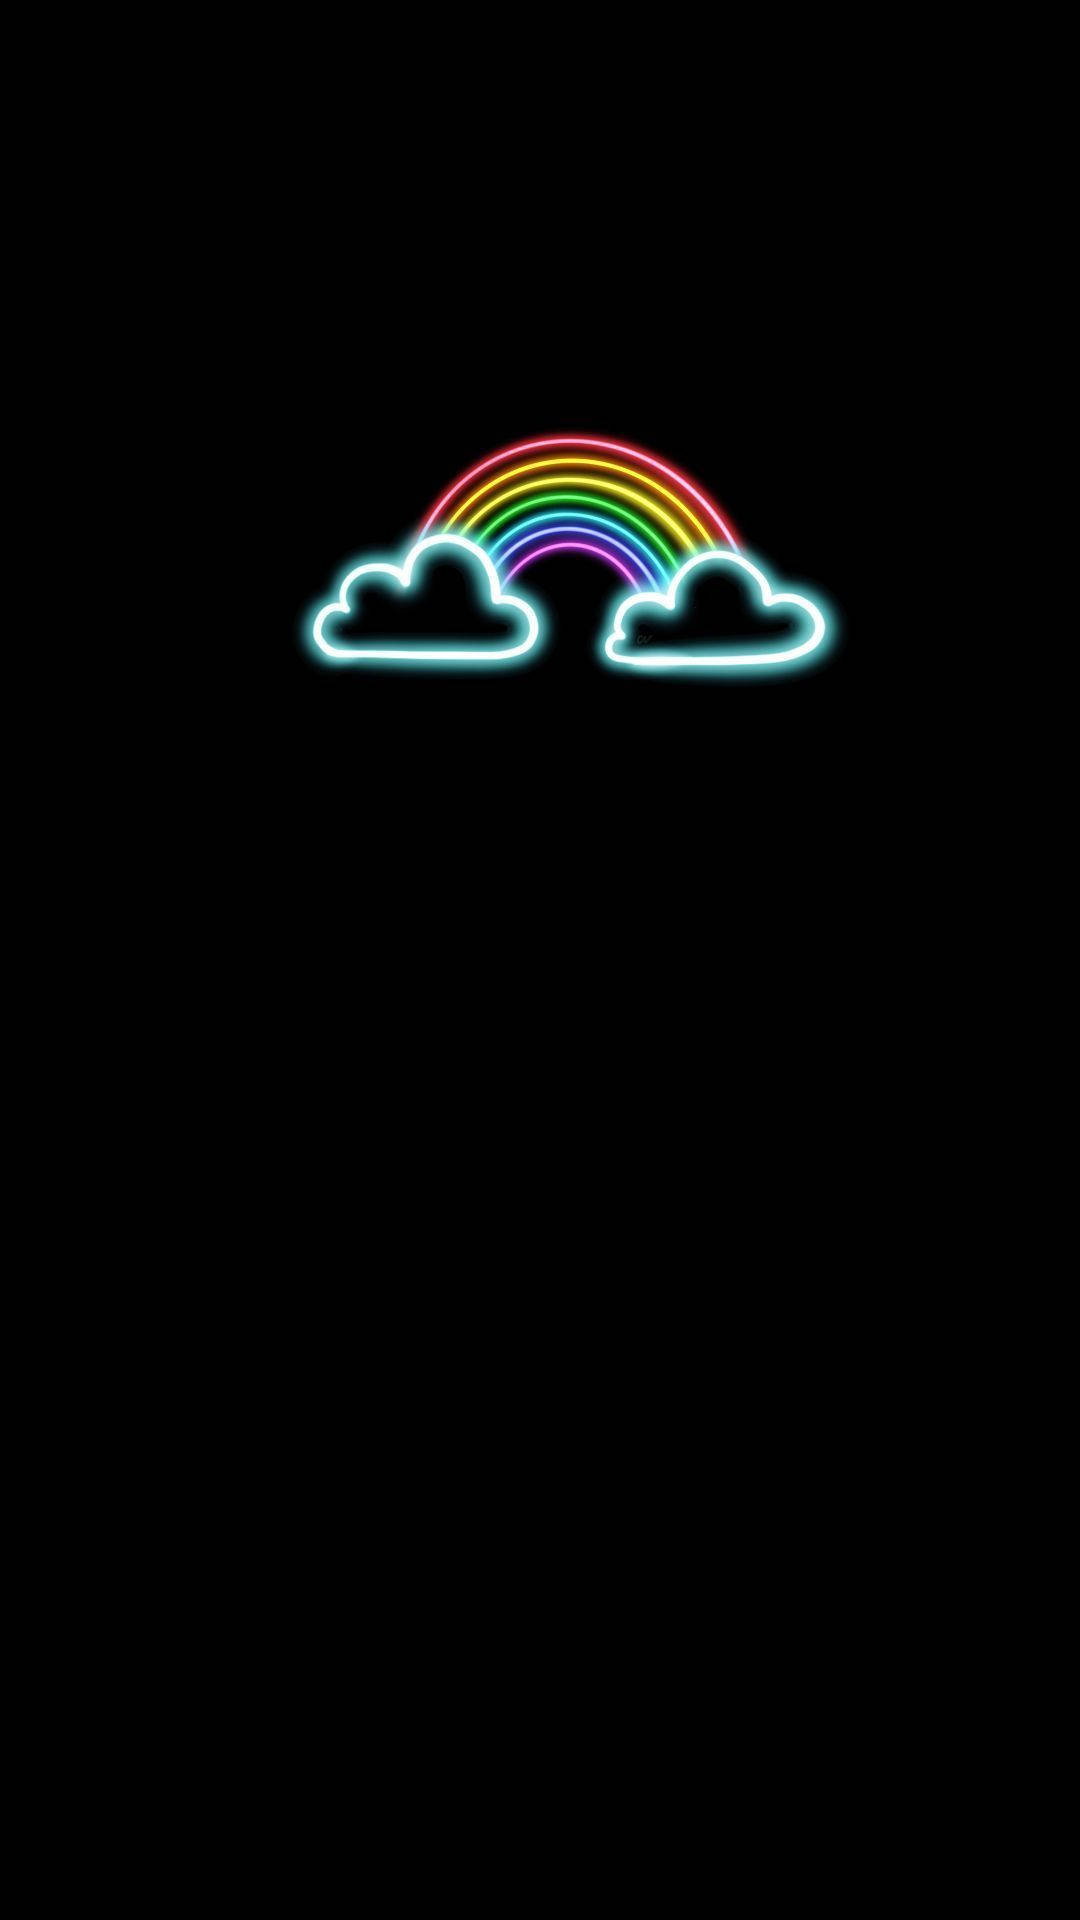 Black Neon Aesthetic Rainbow With Clouds Wallpaper